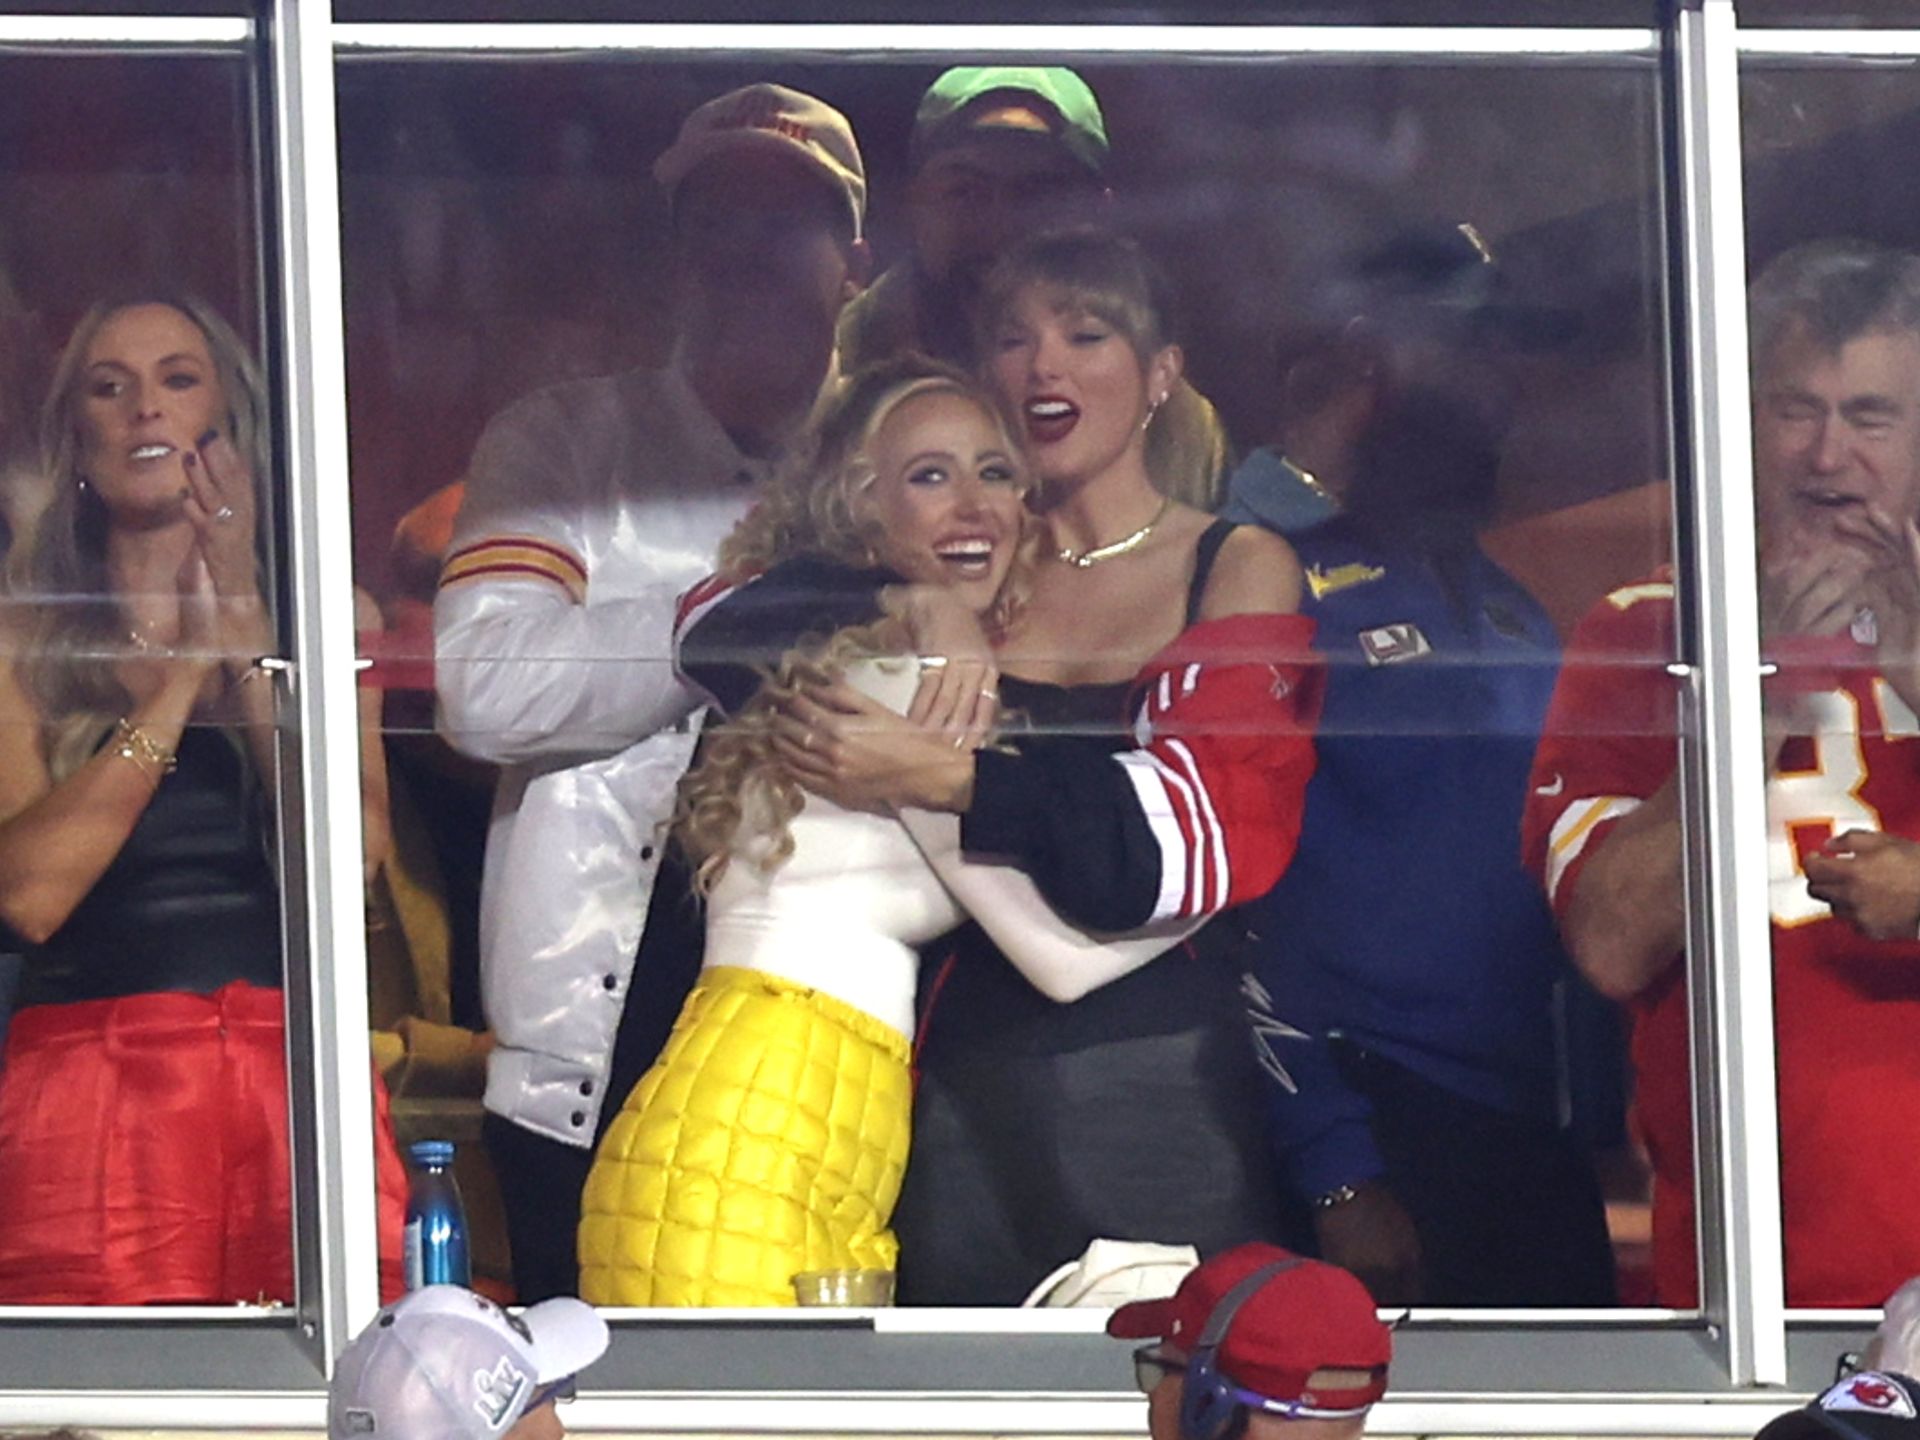 Taylor Swift and Blake Lively Have Dinner With Patrick Mahomes' Wife